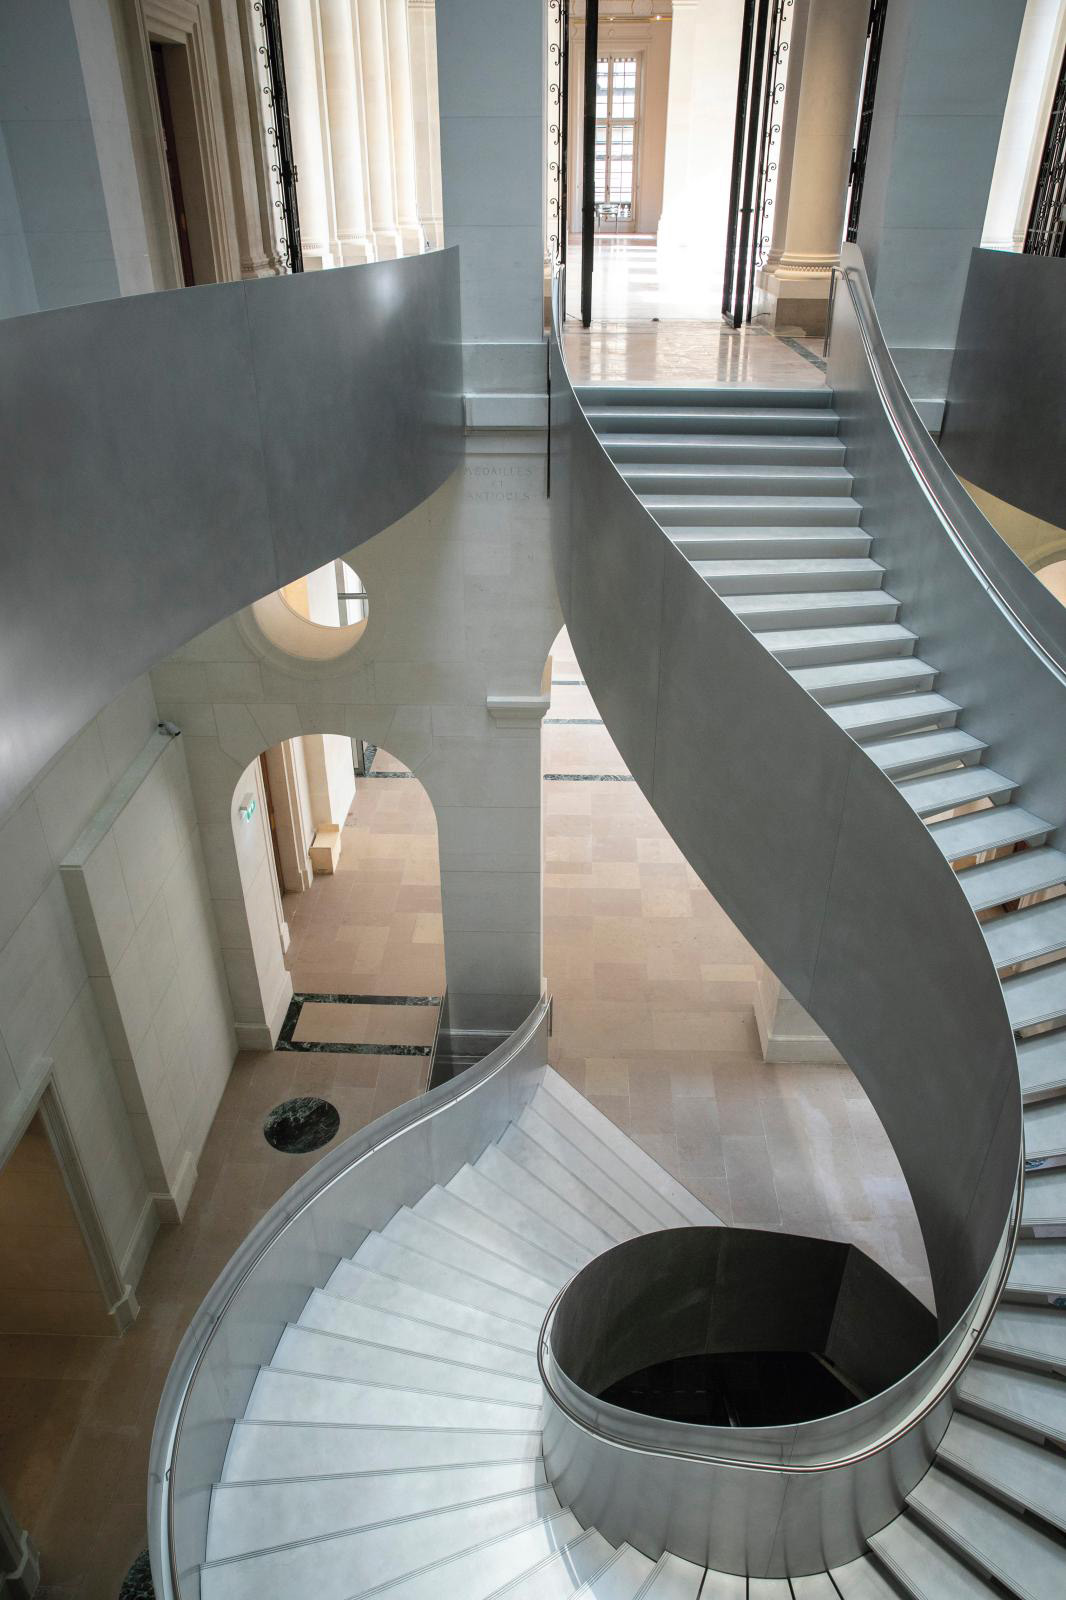 The staircase of the BnF / Richelieu.© Laurent Julliand - Contexts / BnF